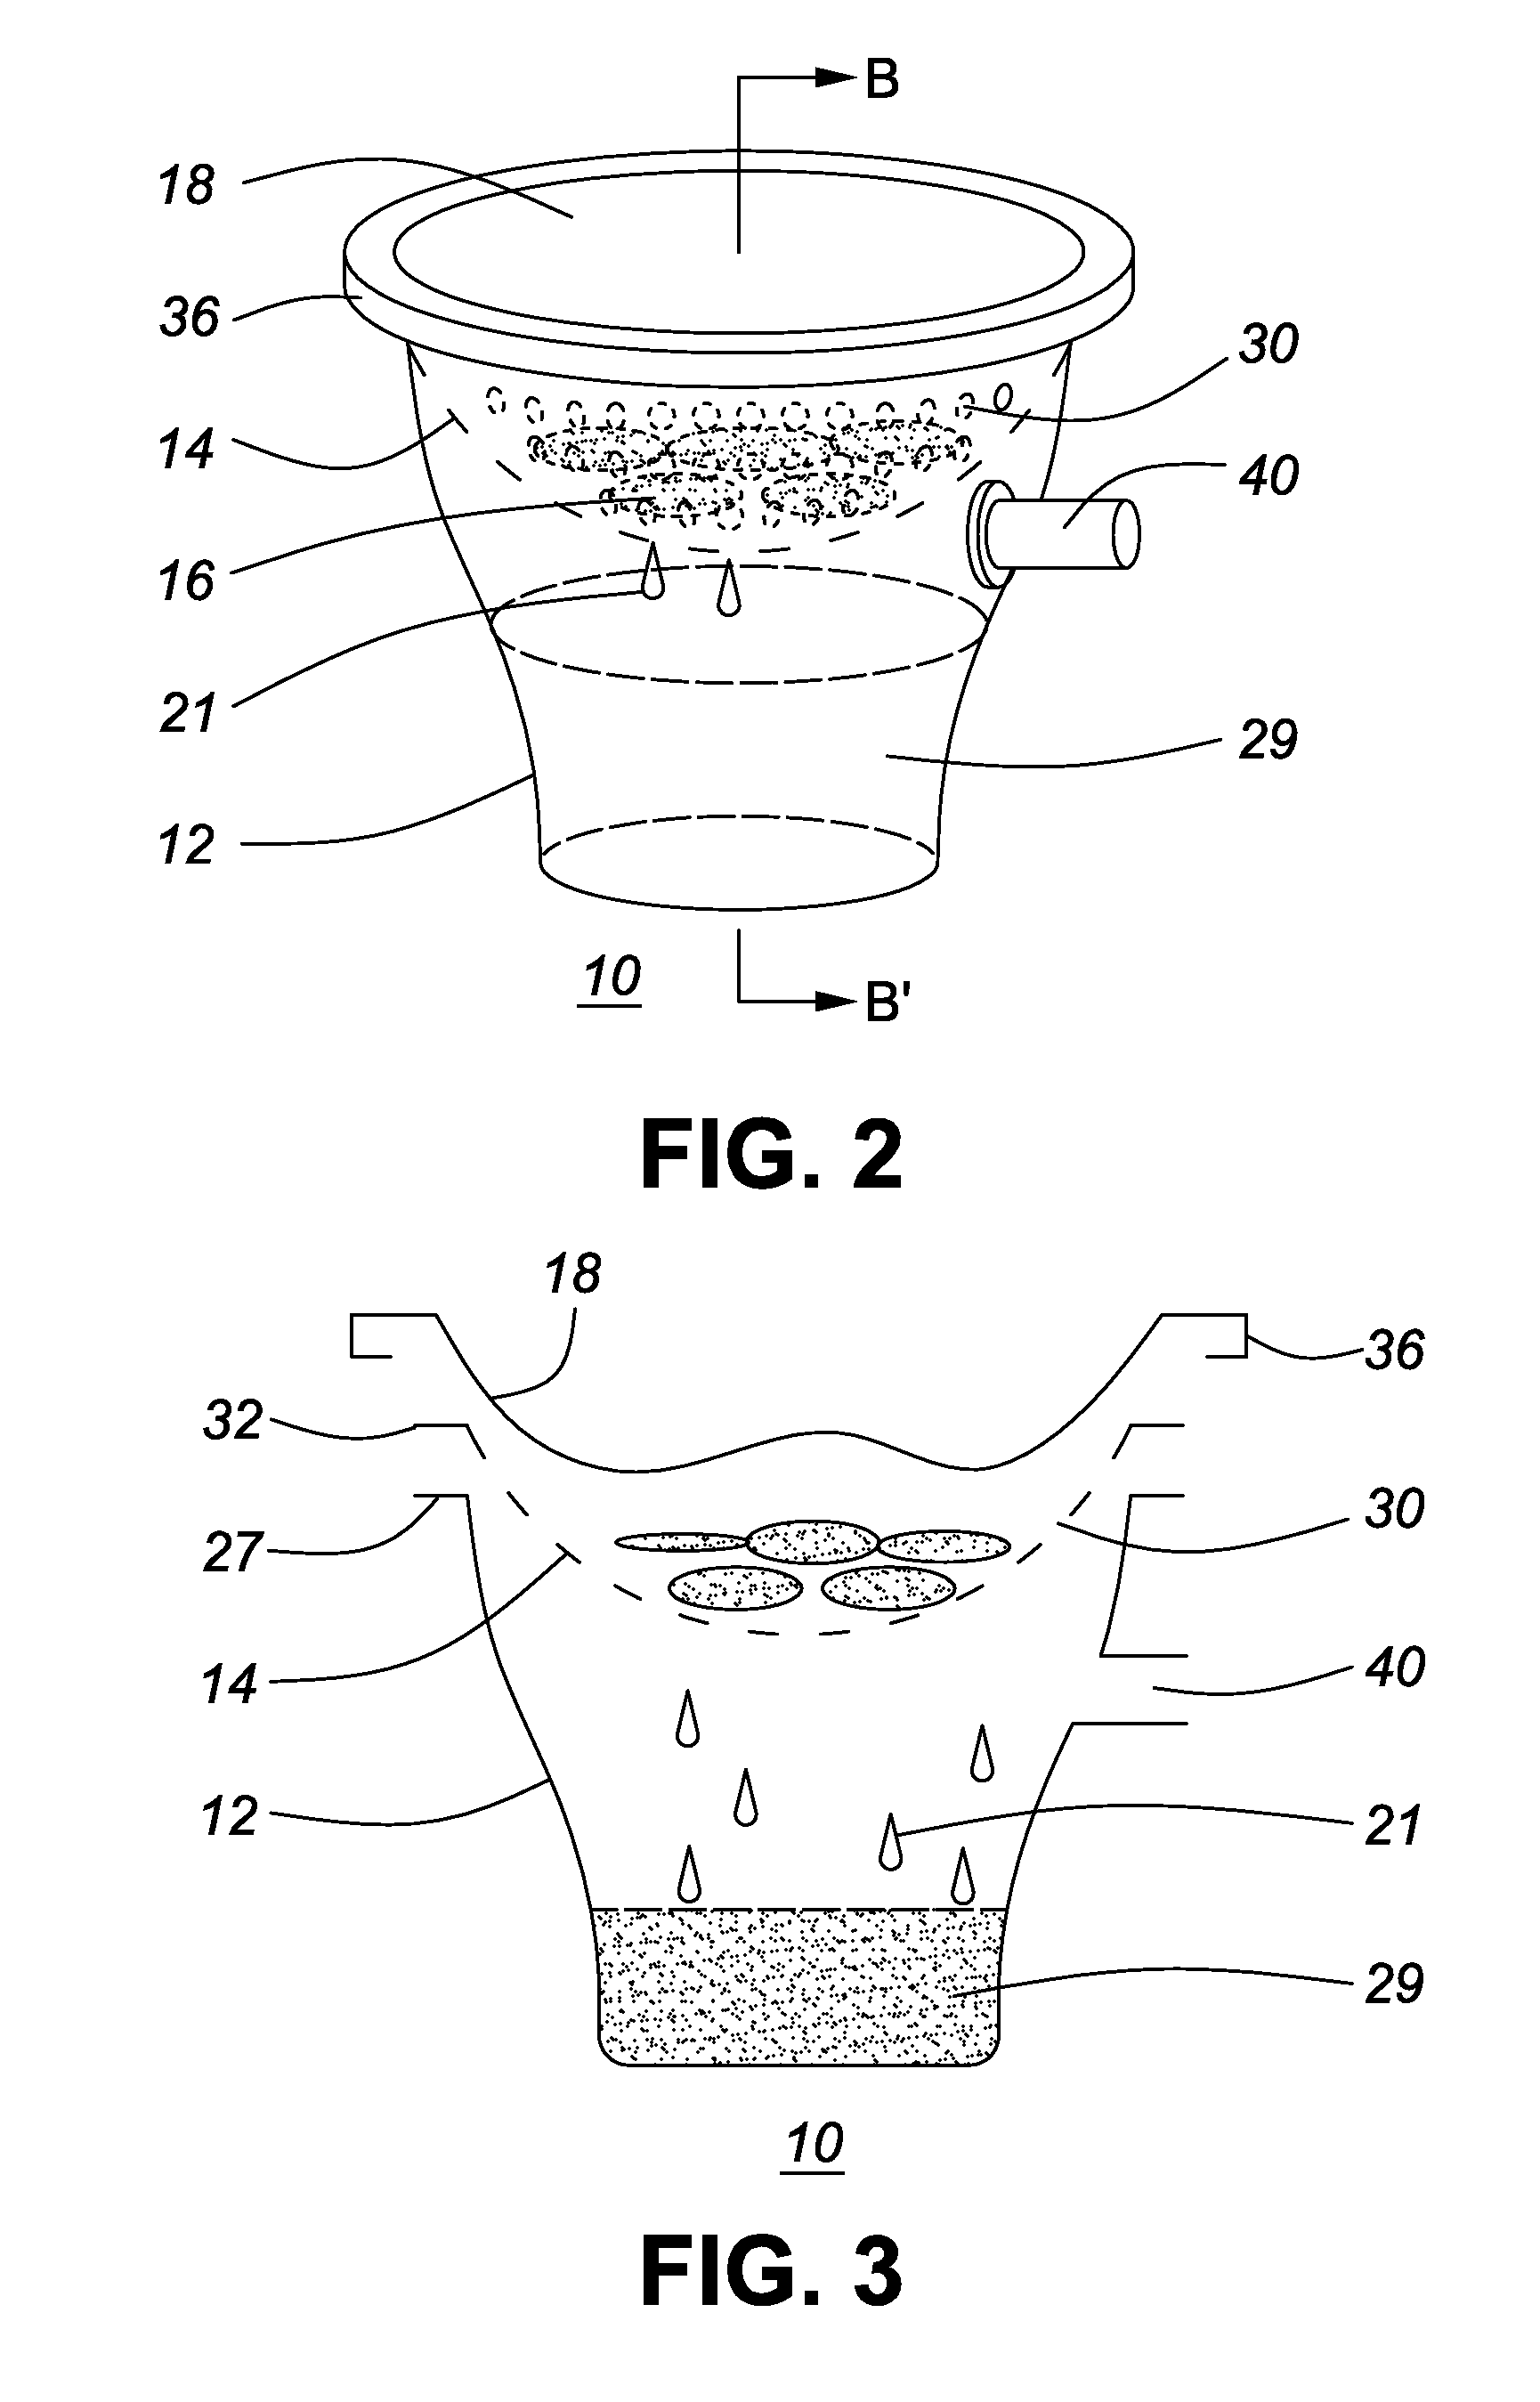 Intra-operative blood recovery system